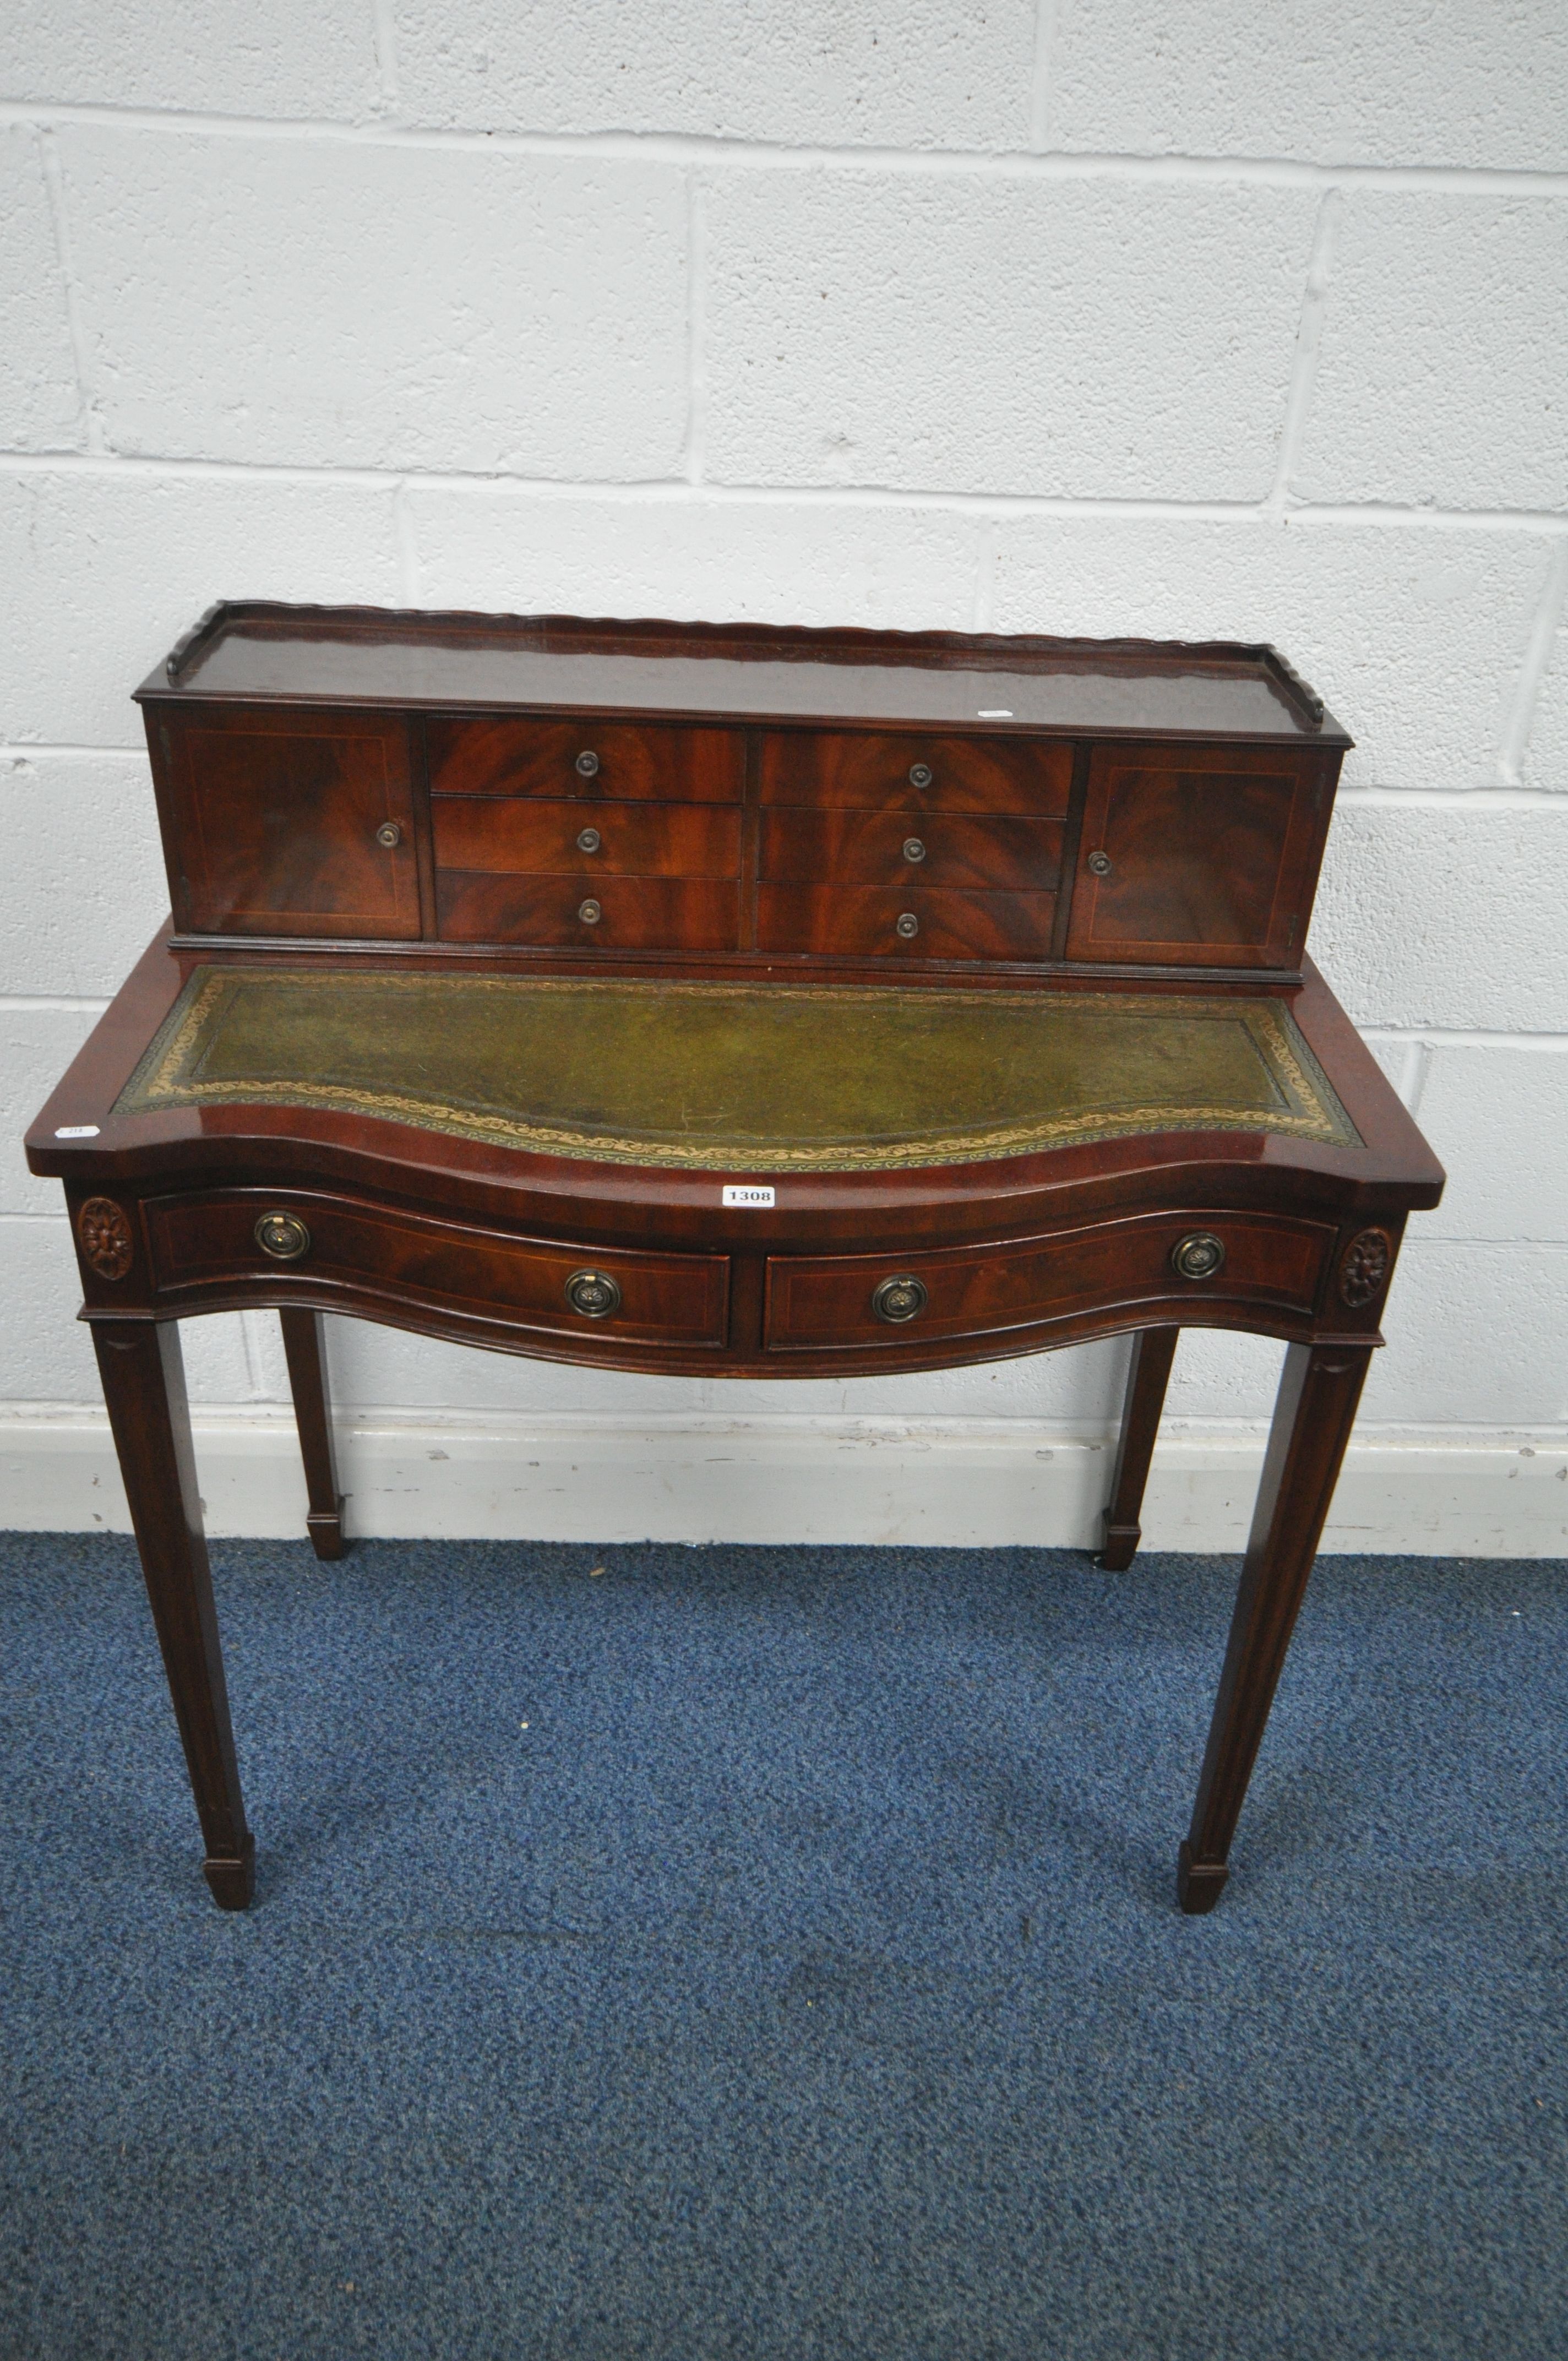 A 20TH CENTURY MAHOGANY BOW FRONT LADIES DESK, with a raised back, fitted with an arrangement of